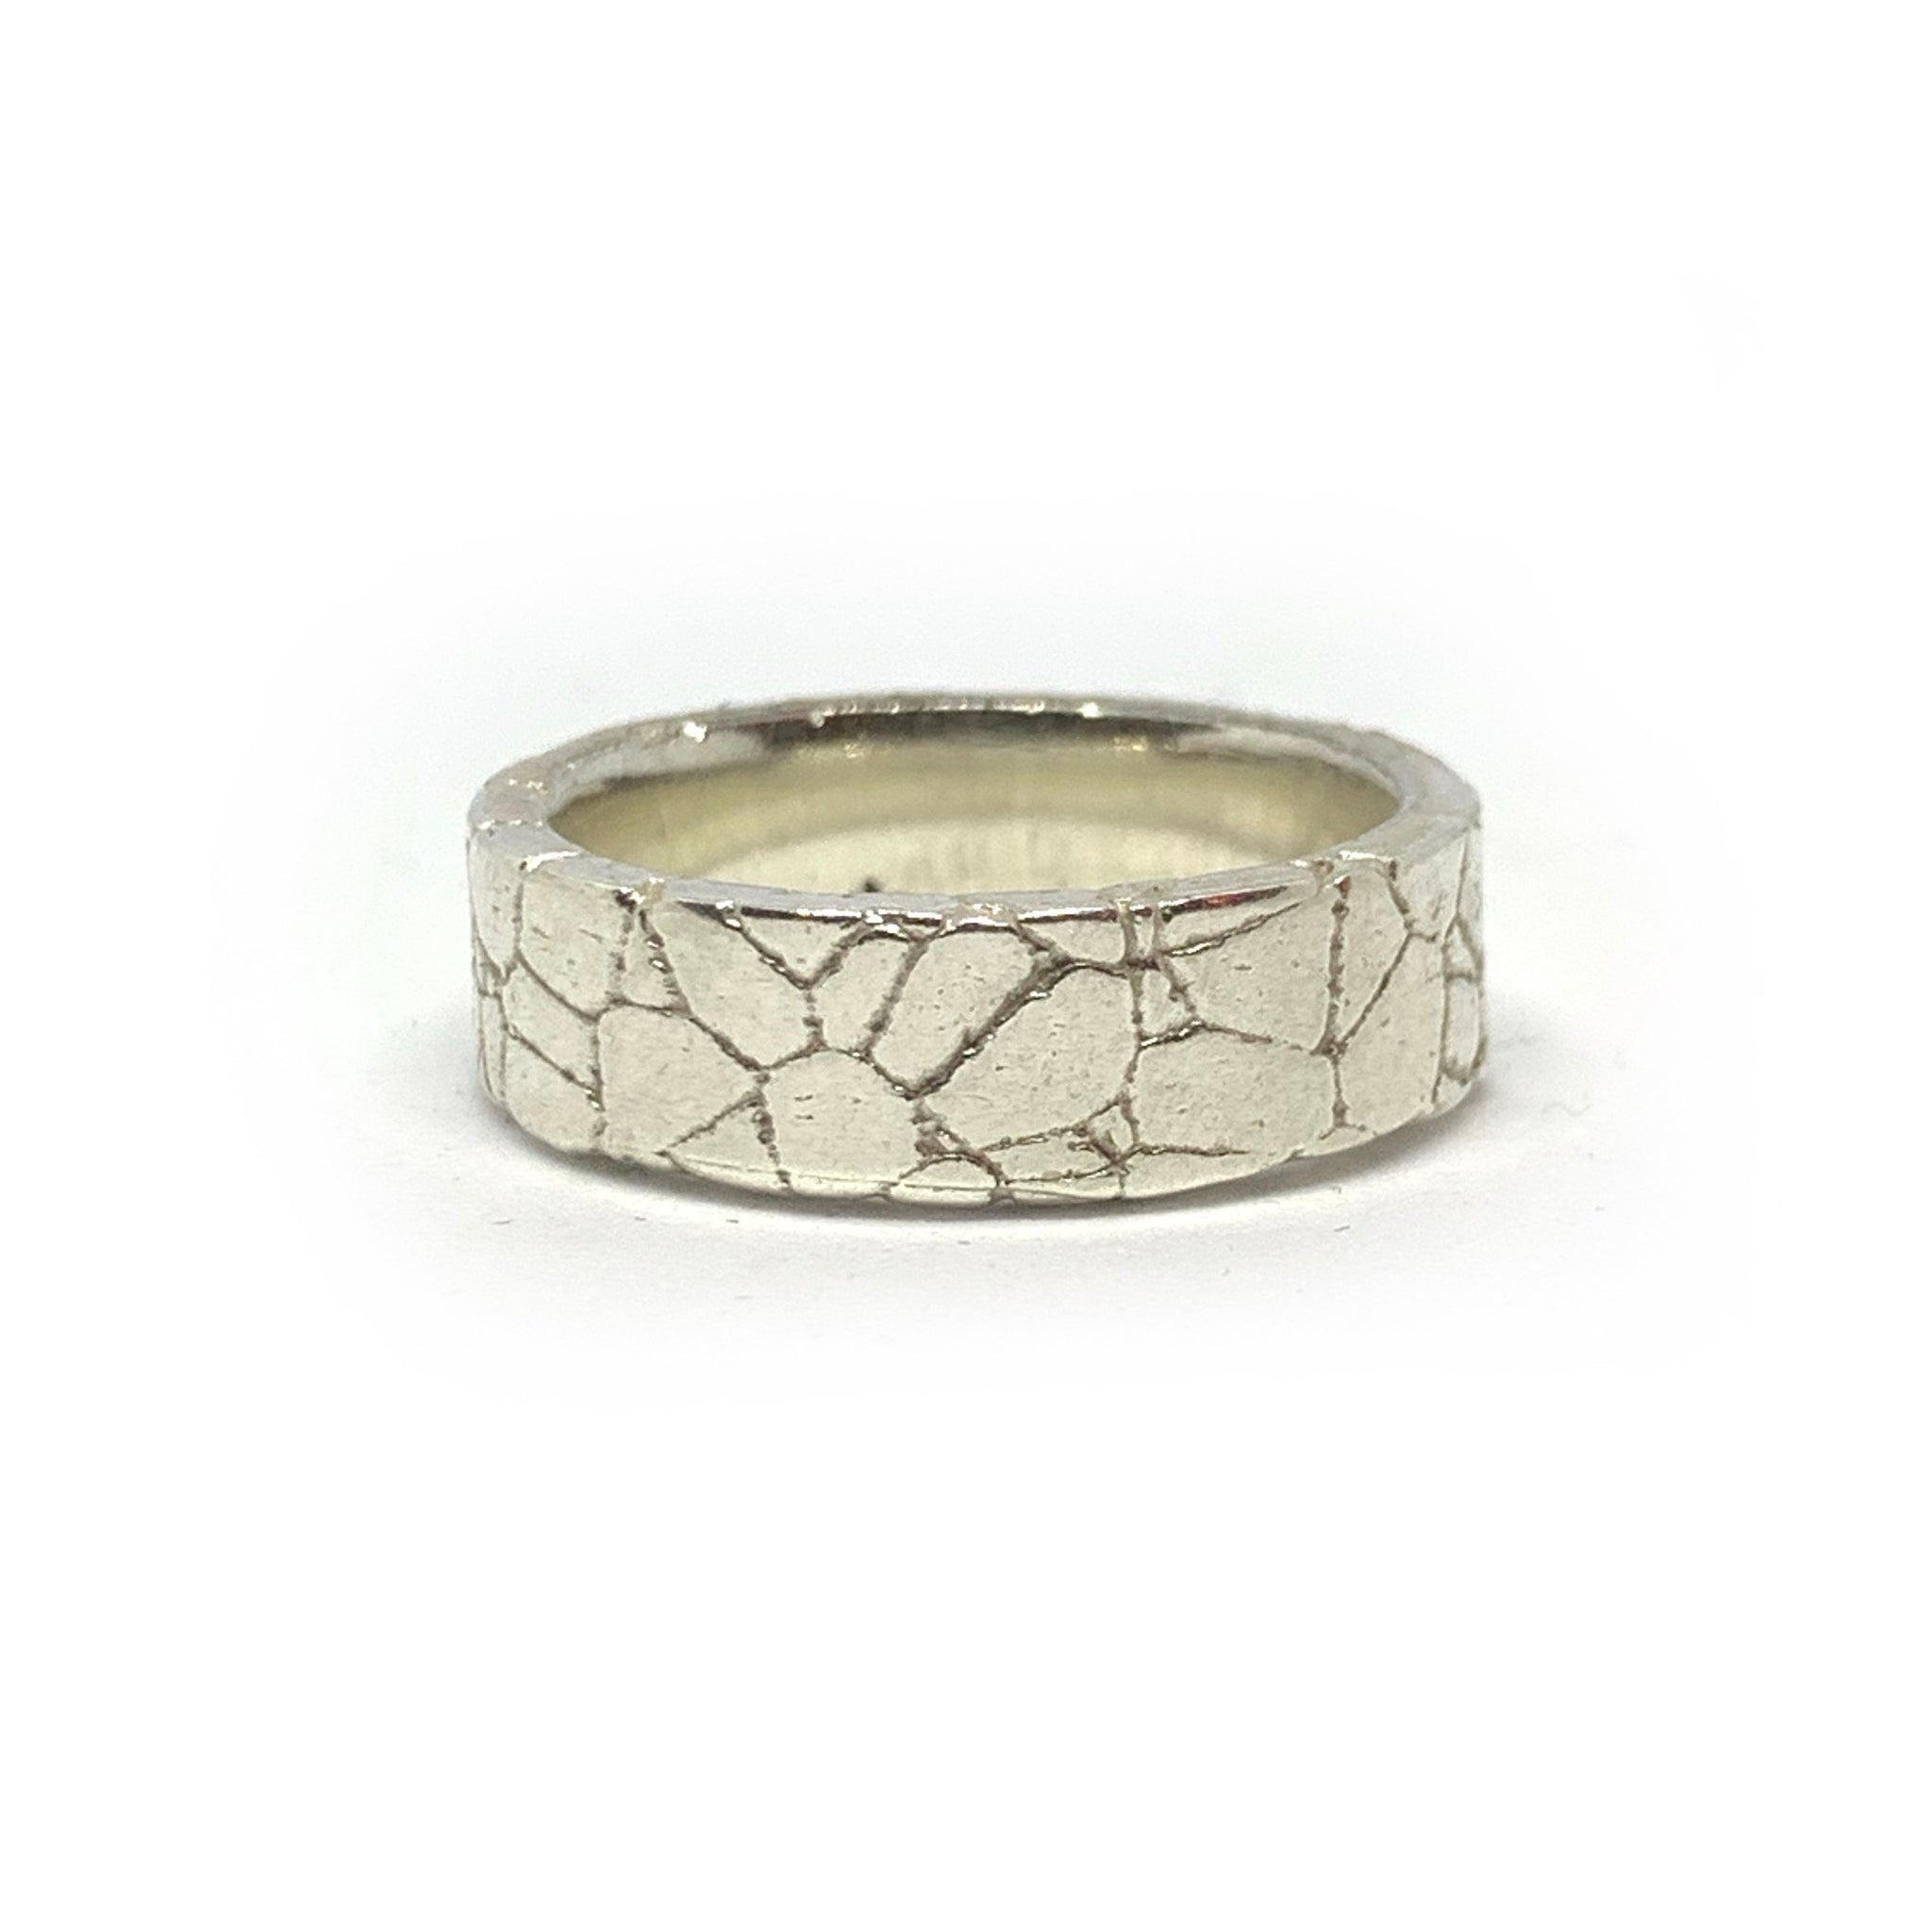 CRACKED RING